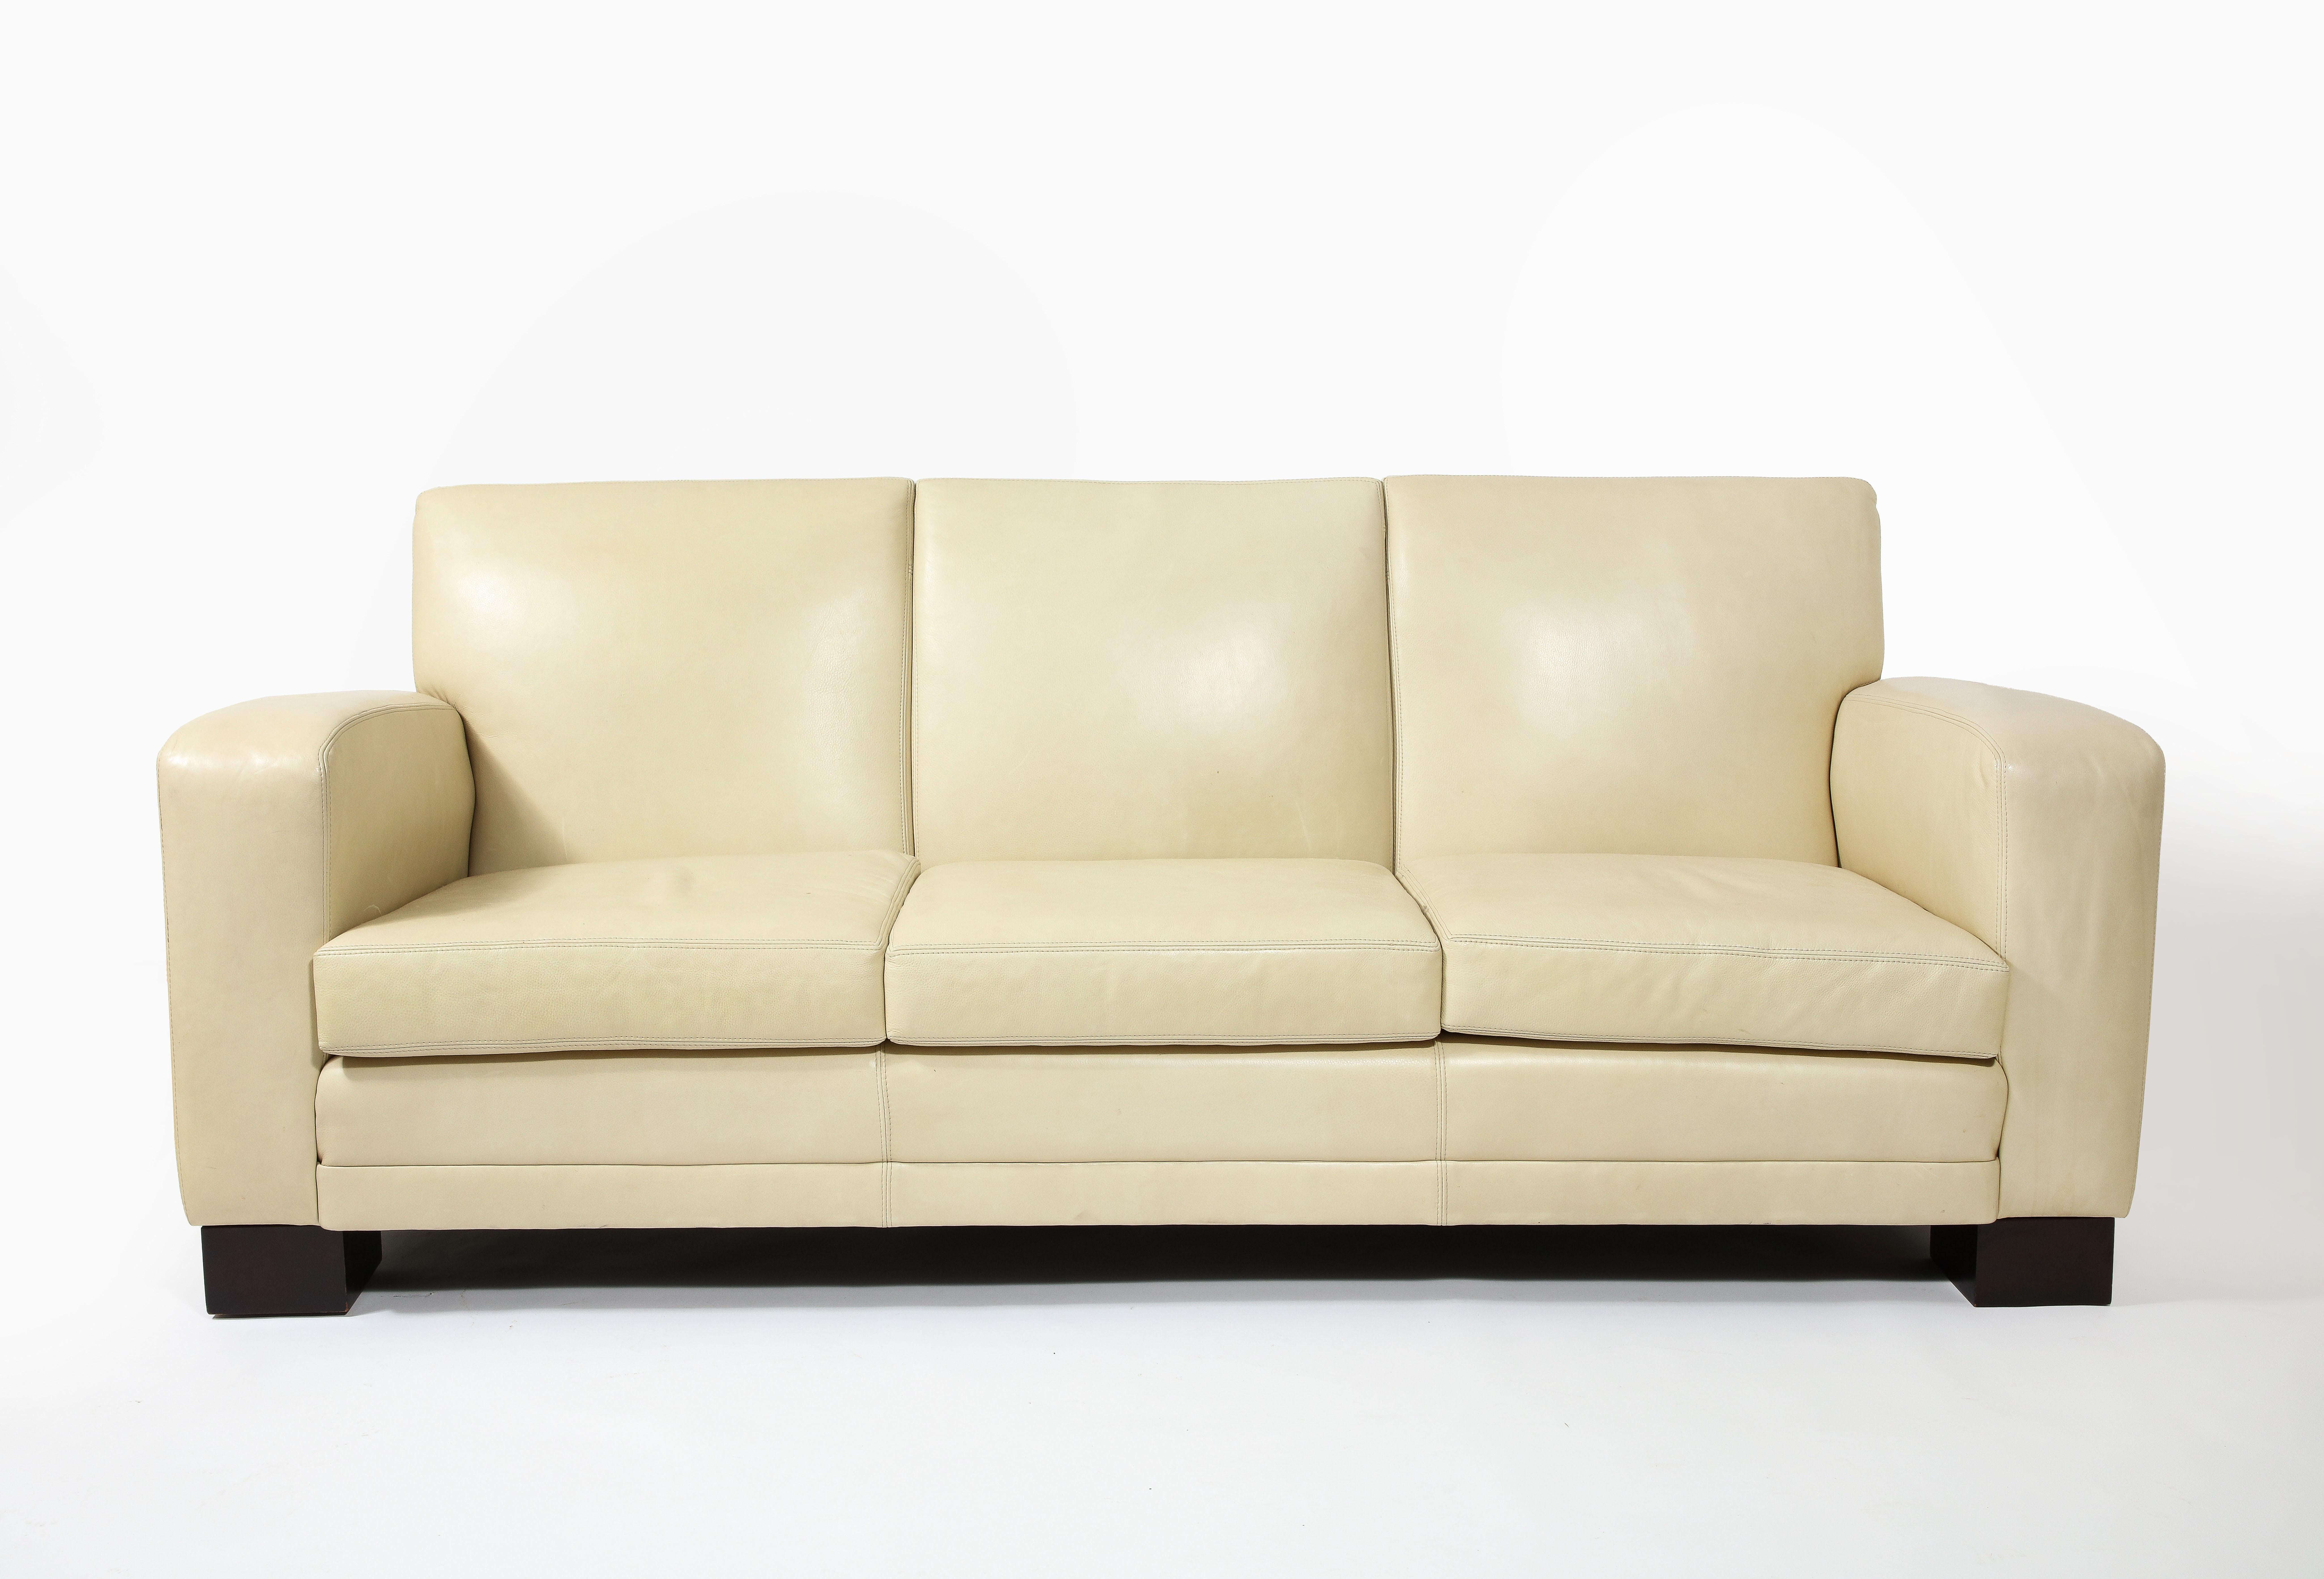 French Jacques Adnet Modernist Sofa, France 1940's